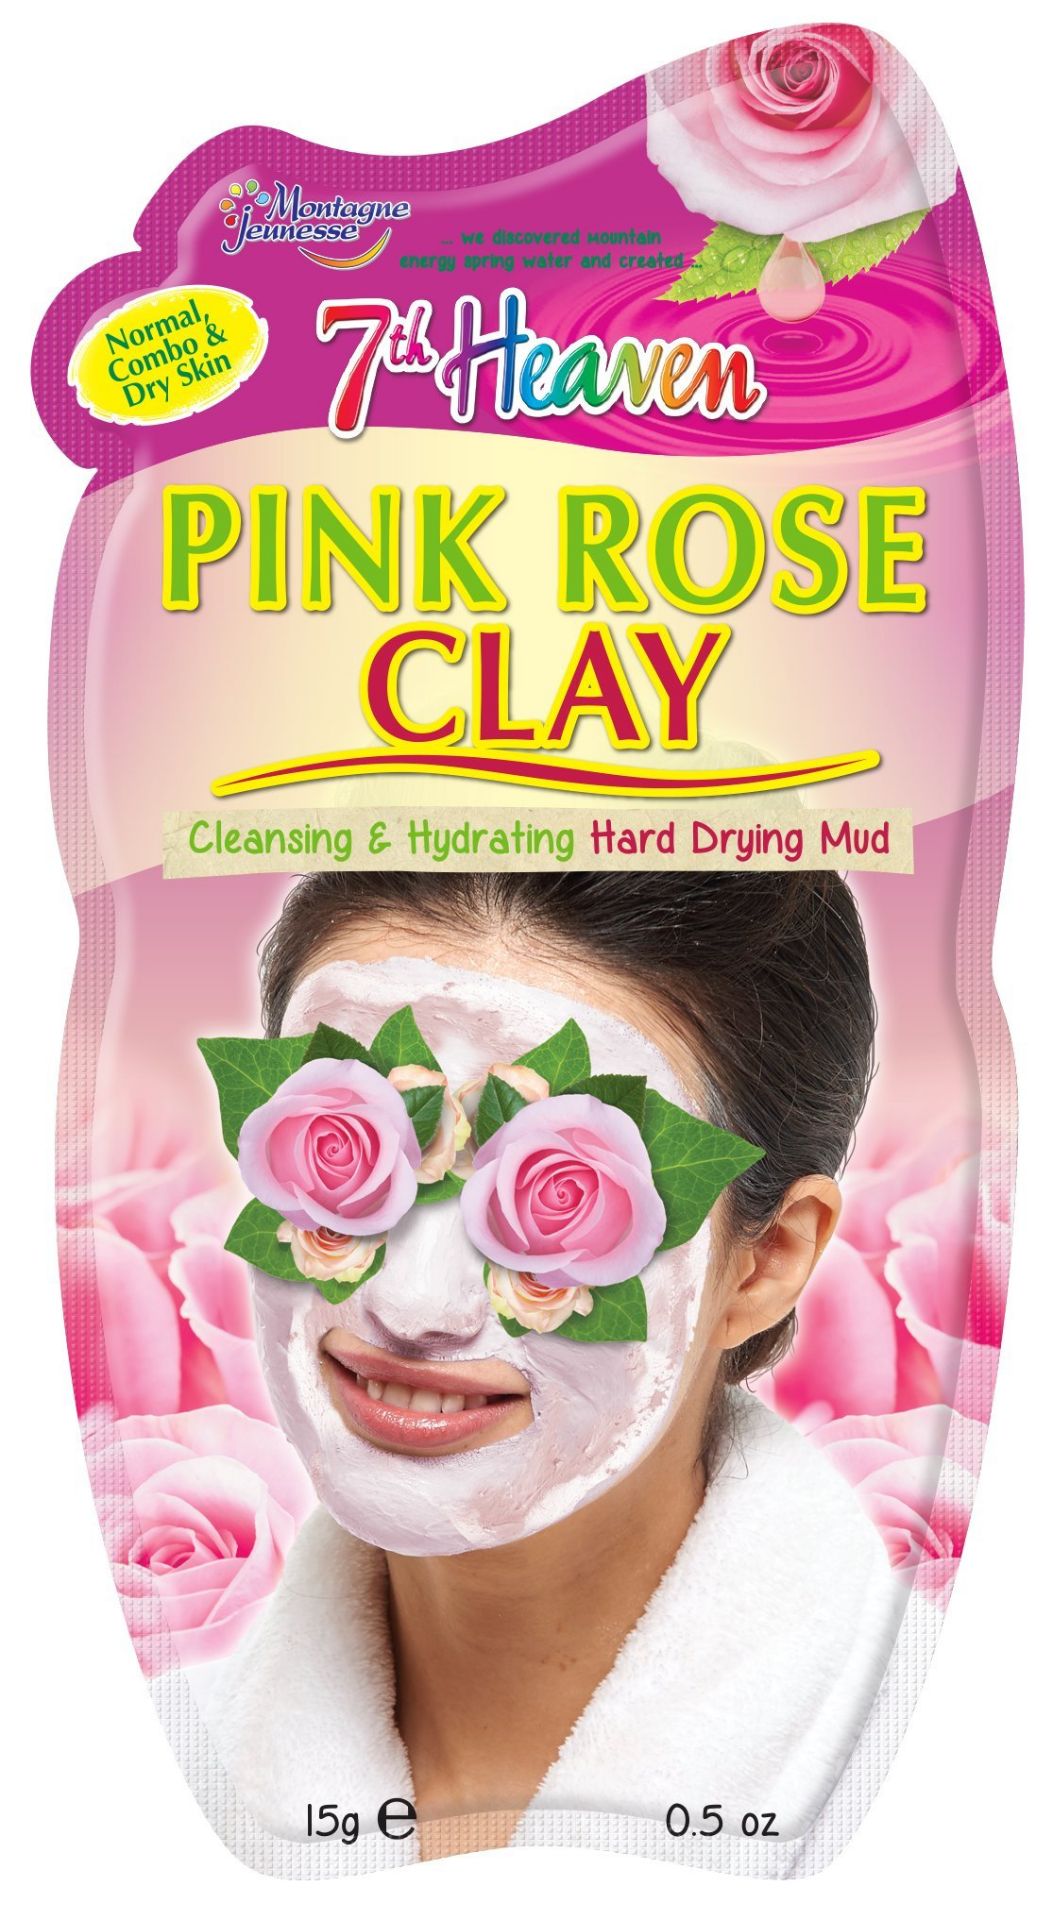 191 X BRAND NEW 7TH HEAVEN PINK ROSE CLAY FACE MASKS R16-11